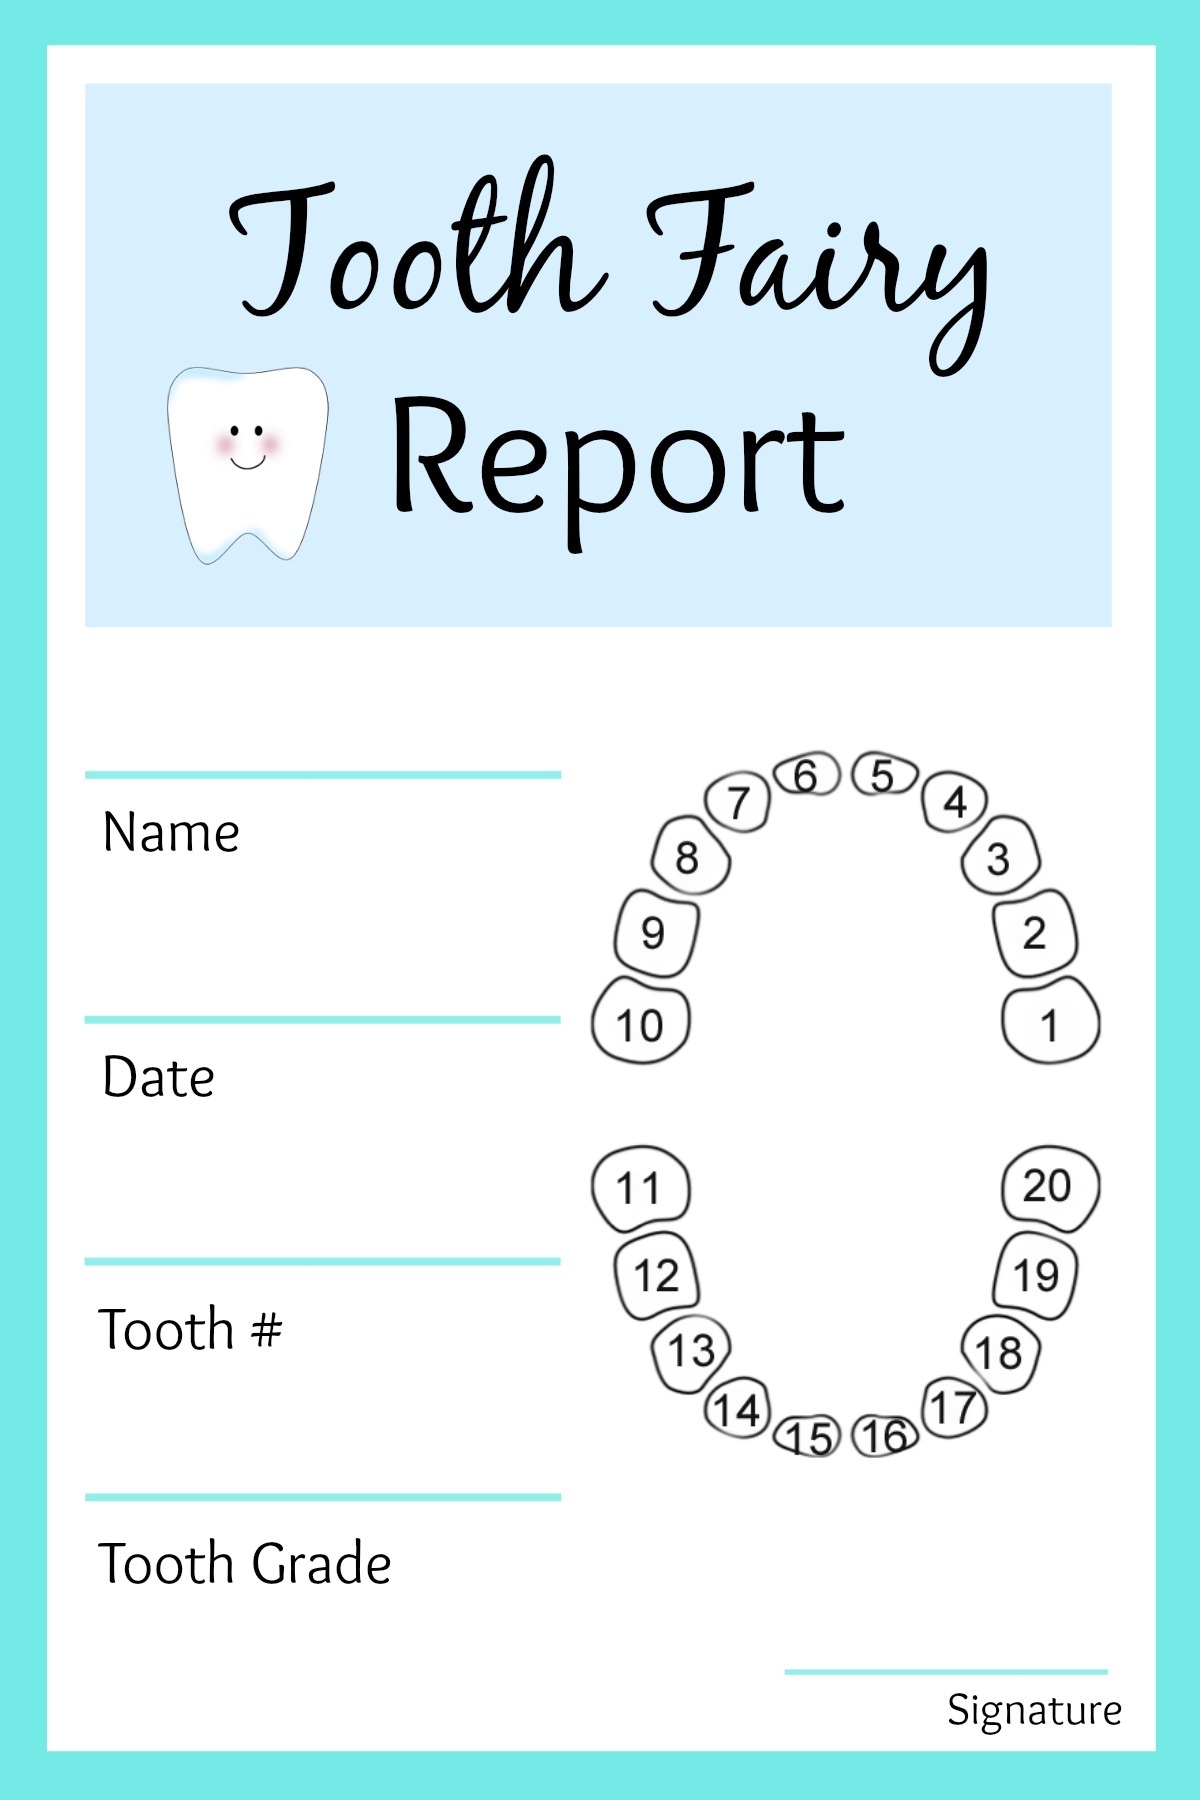 Tooth Fairy Ideas And Free Printables: Tooth Fairy Letterhead Report - Tooth Fairy Stationery Free Printable